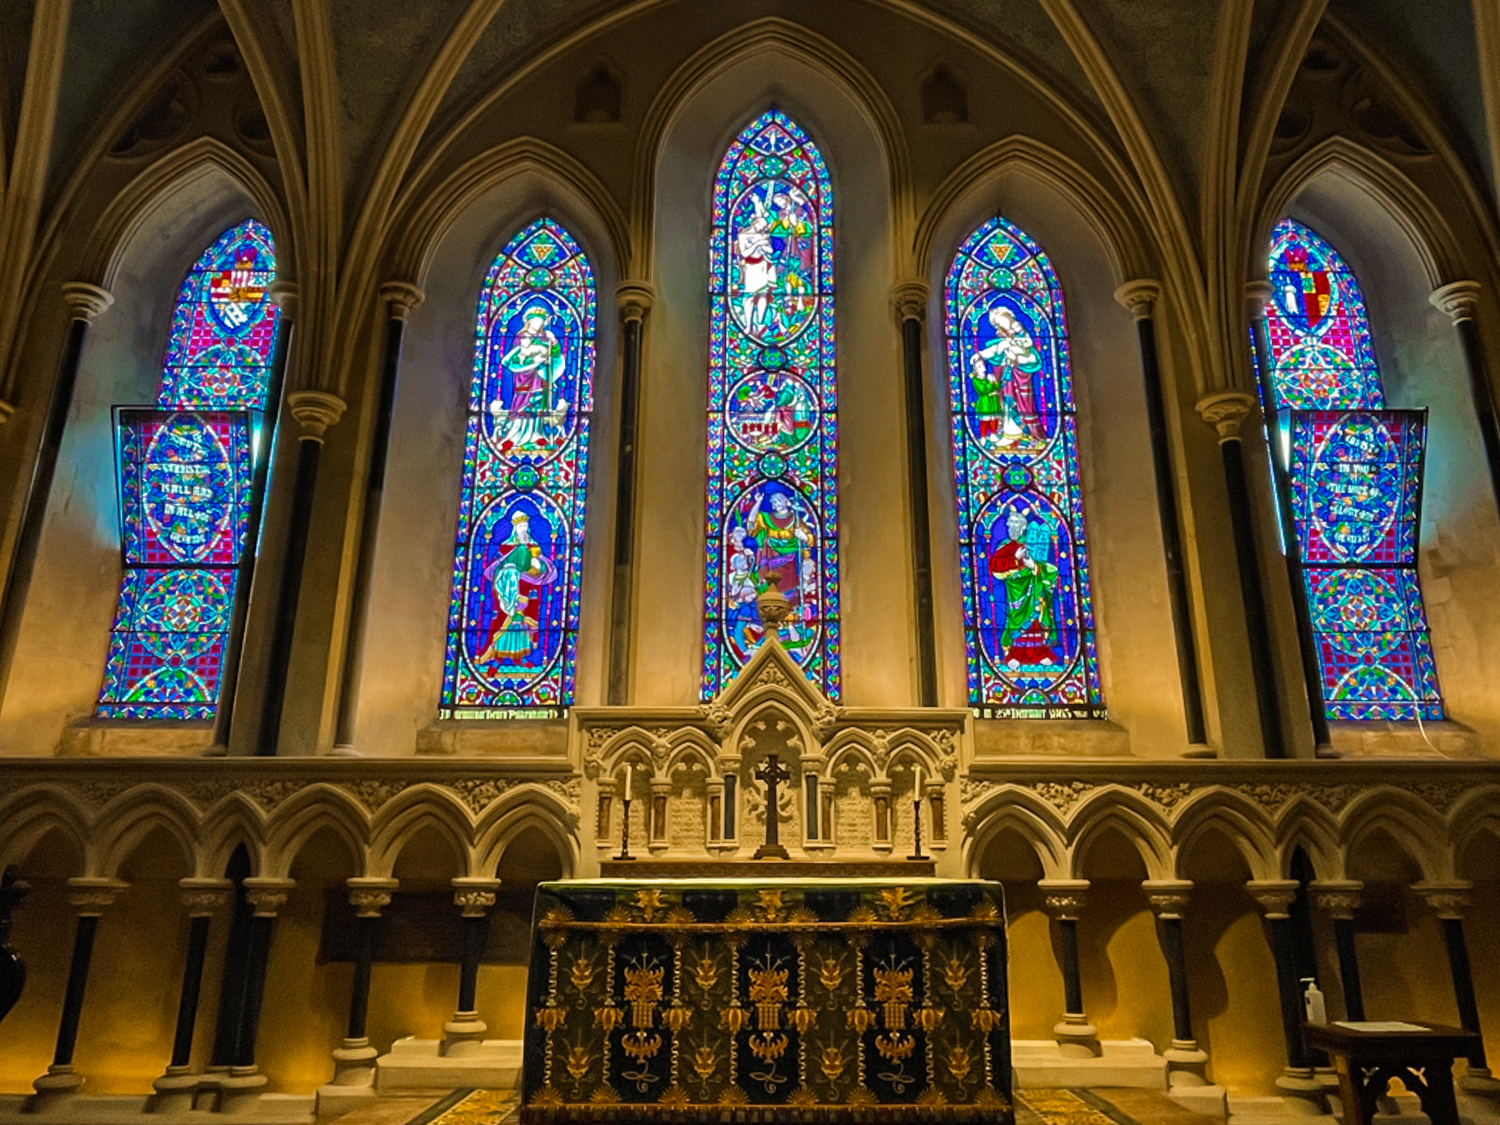 A vast wall of a cathedral that's blanketed in vibrant stained-glass windows, depicting saints and other religious scenes. The lighting is dim yet there's a warmth to the scene.